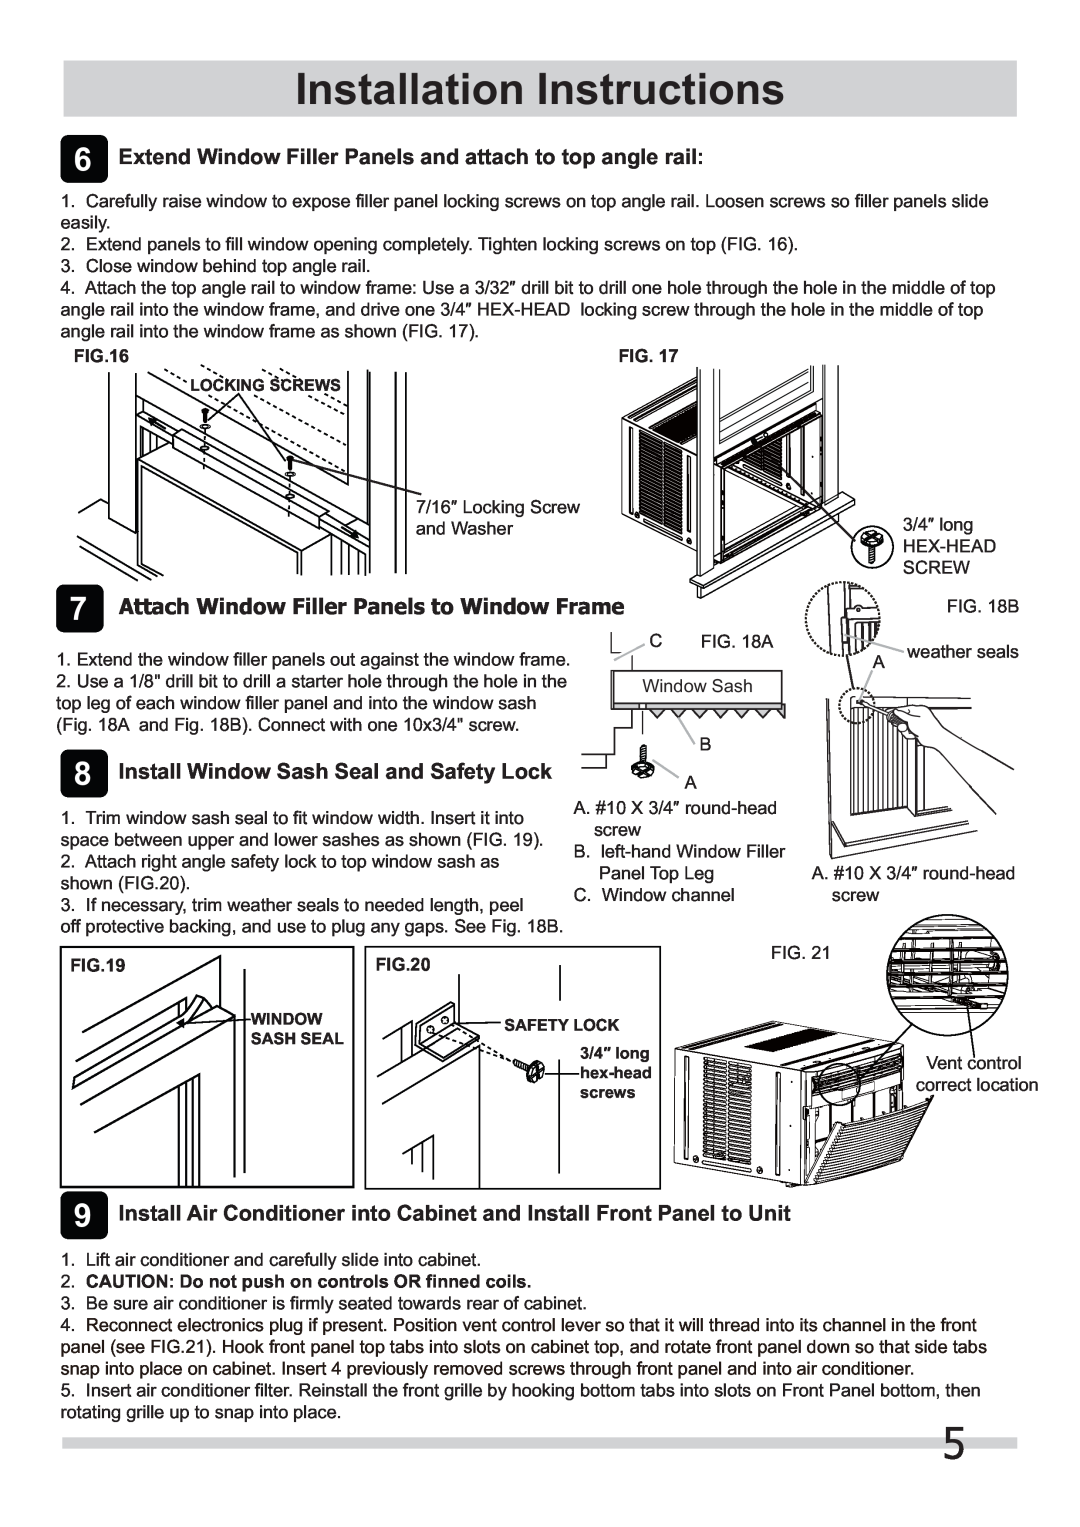 Frigidaire 2020219A0951 Extend Window Filler Panels and attach to top angle rail, Install Window Sash Seal and Safety Lock 